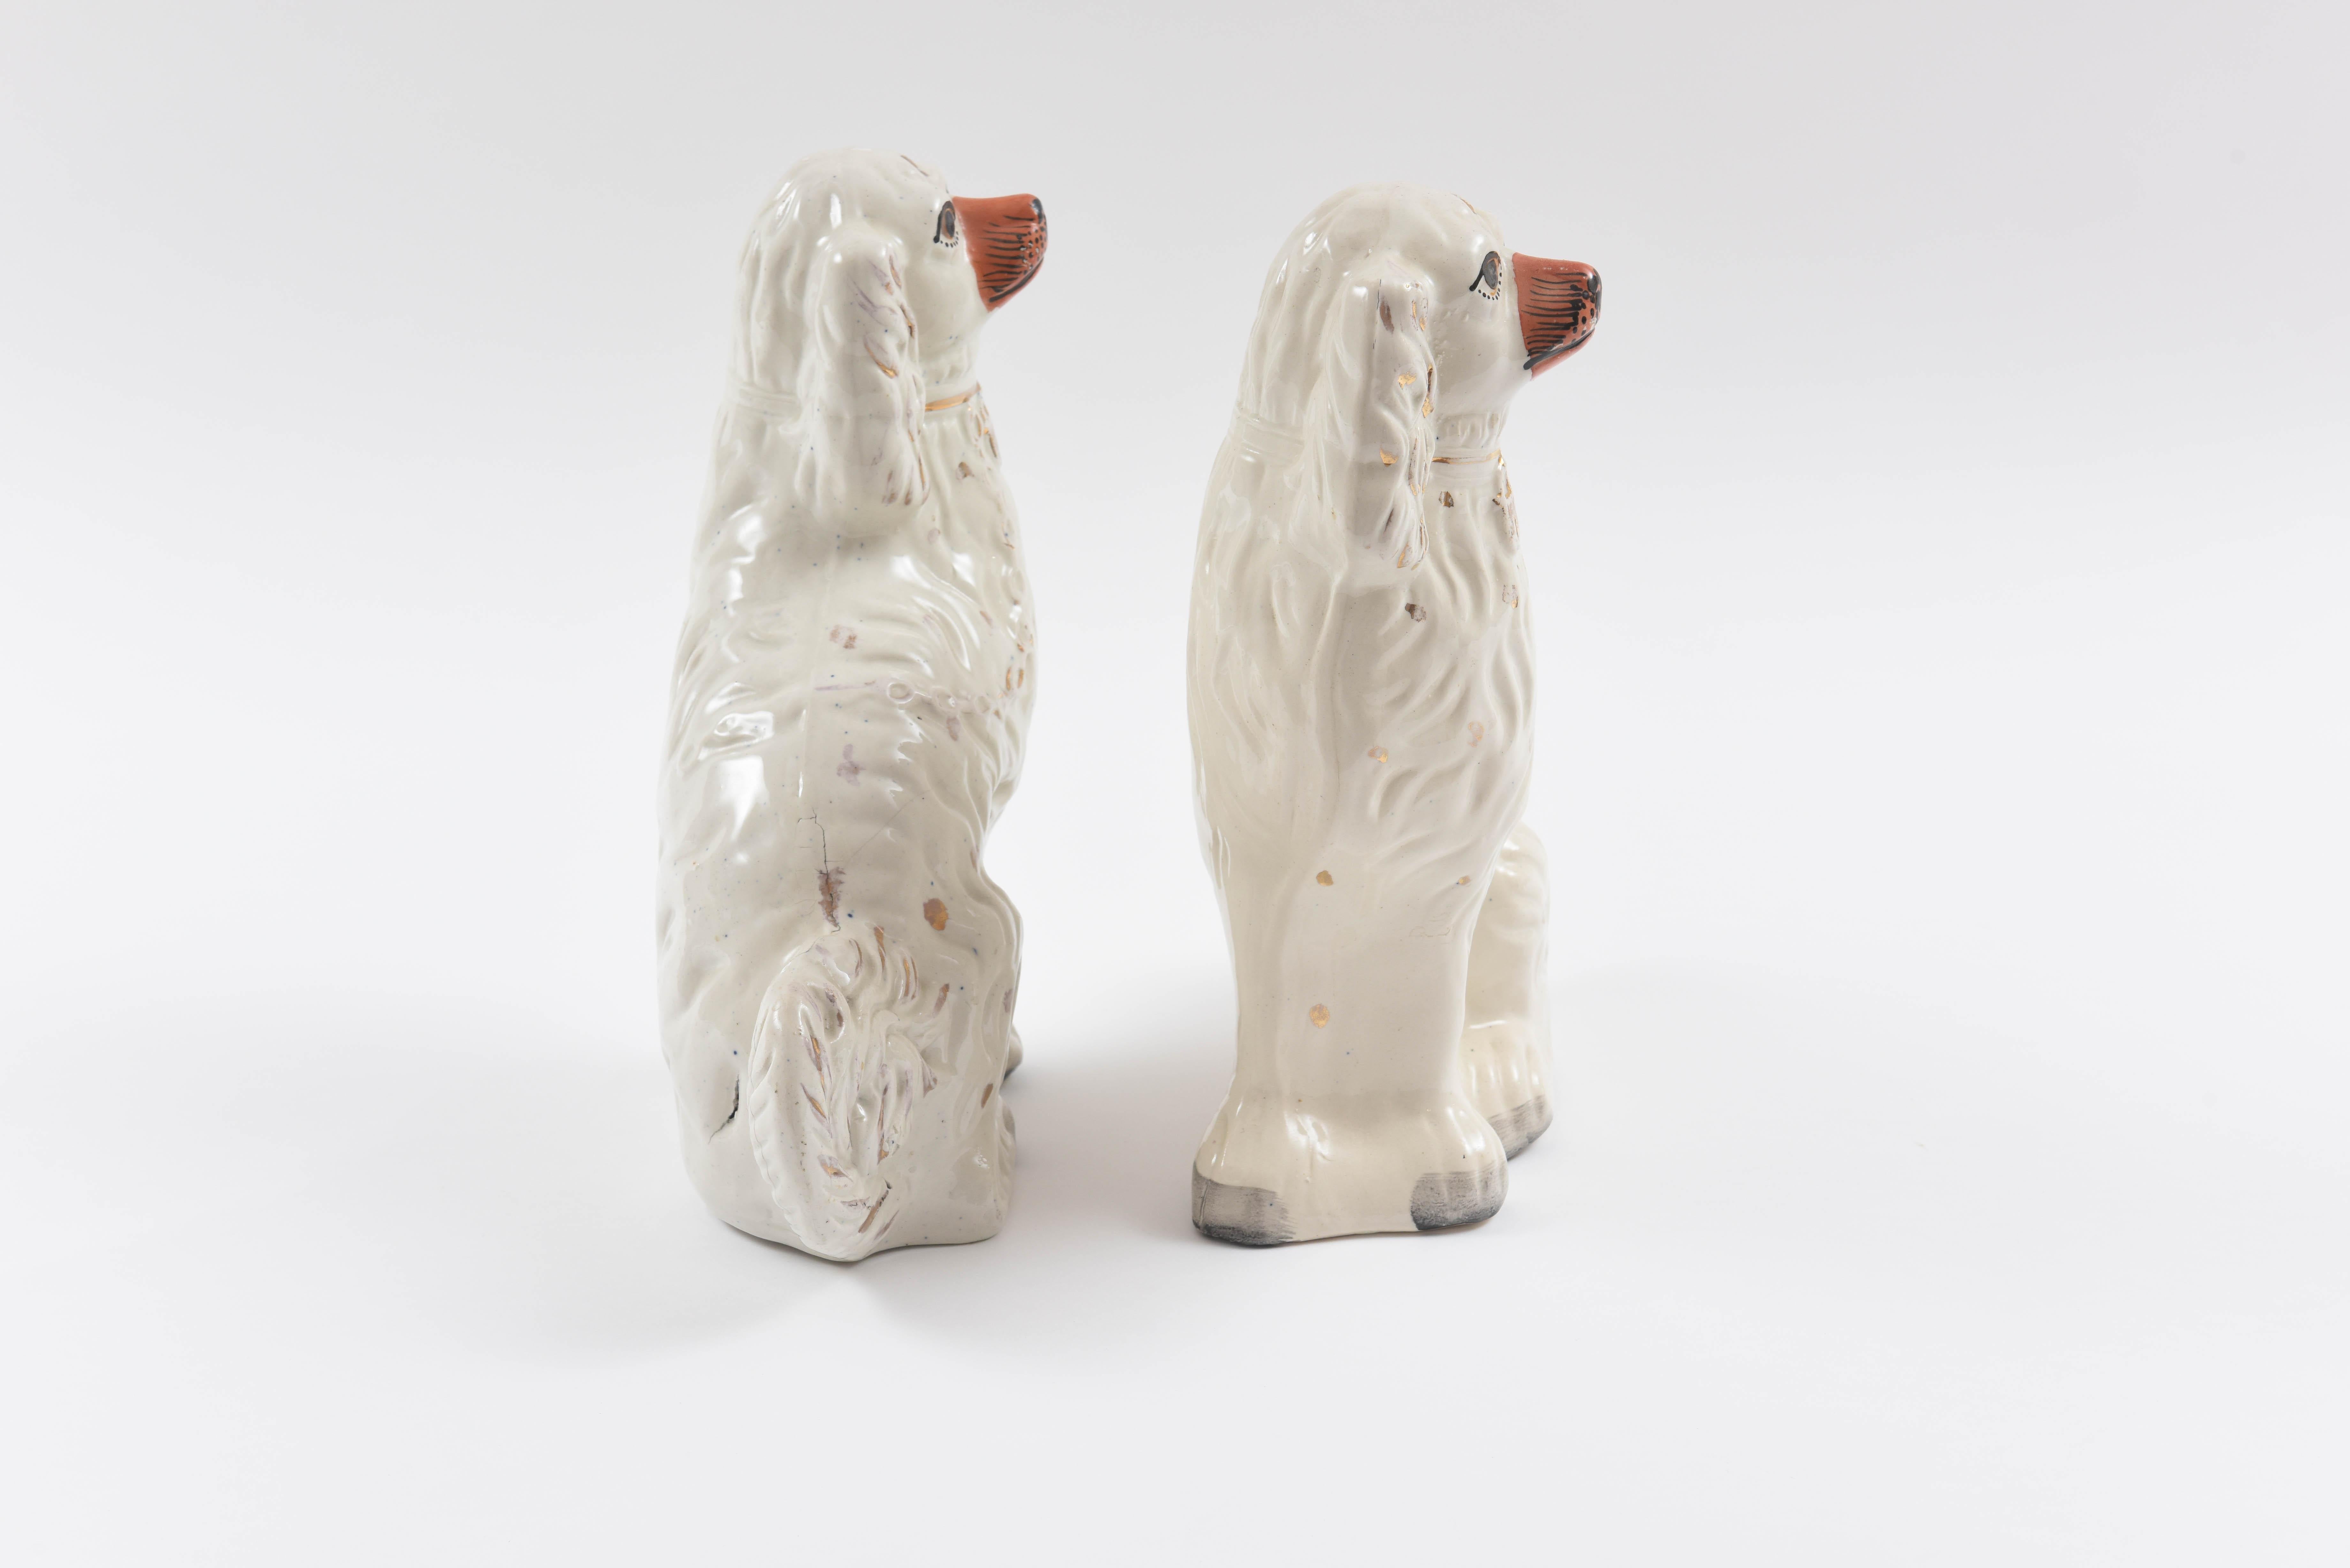 English Pair of Staffordshire Dogs, 19th Century with Charming Expressions